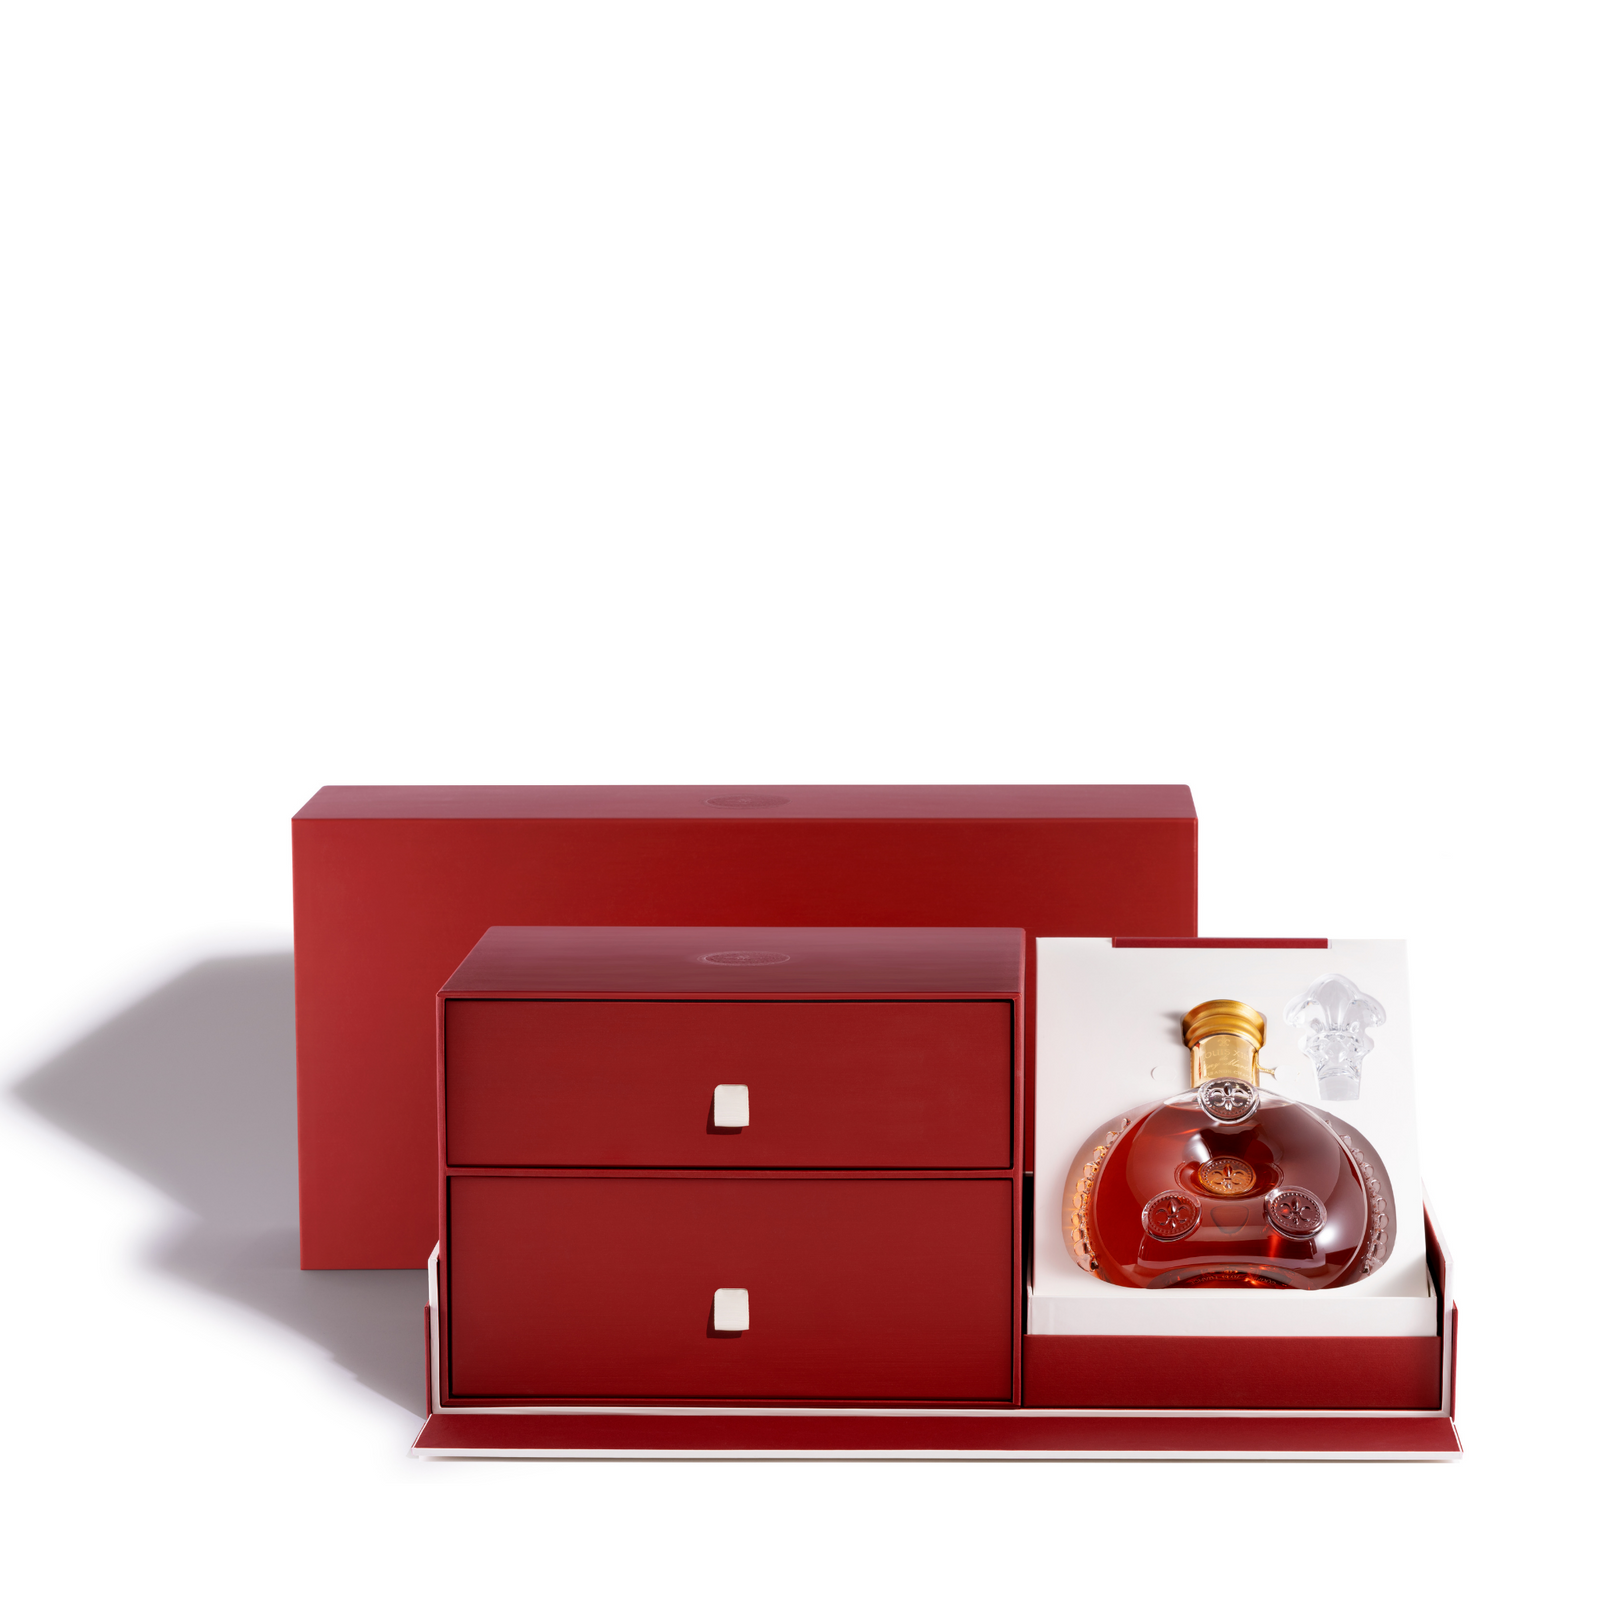 A packshot of a red cigar set packaginf with the decanter exposed, white background